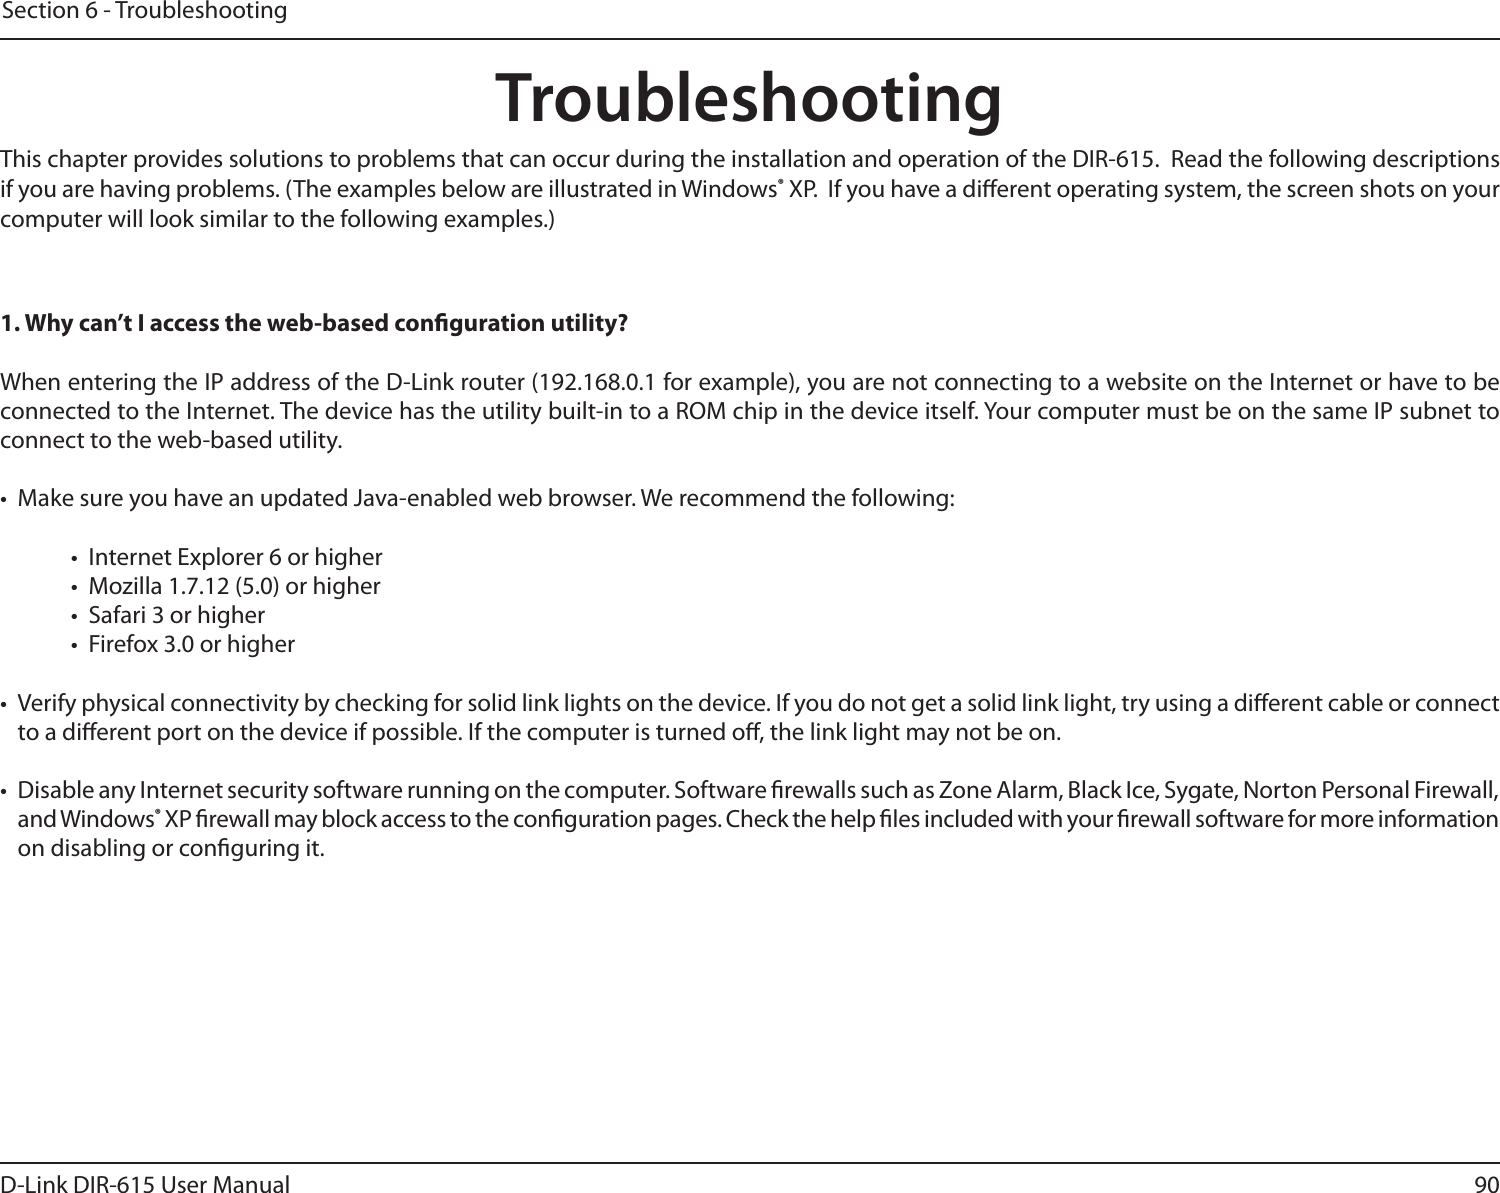 90D-Link DIR-615 User ManualSection 6 - TroubleshootingTroubleshootingThis chapter provides solutions to problems that can occur during the installation and operation of the DIR-615.  Read the following descriptions if you are having problems. (The examples below are illustrated in Windows® XP.  If you have a dierent operating system, the screen shots on your computer will look similar to the following examples.)1. Why can’t I access the web-based conguration utility?When entering the IP address of the D-Link router (192.168.0.1 for example), you are not connecting to a website on the Internet or have to be connected to the Internet. The device has the utility built-in to a ROM chip in the device itself. Your computer must be on the same IP subnet to connect to the web-based utility. •  Make sure you have an updated Java-enabled web browser. We recommend the following: •  Internet Explorer 6 or higher •  Mozilla 1.7.12 (5.0) or higher •  Safari 3 or higher •  Firefox 3.0 or higher •  Verify physical connectivity by checking for solid link lights on the device. If you do not get a solid link light, try using a dierent cable or connect to a dierent port on the device if possible. If the computer is turned o, the link light may not be on.•  Disable any Internet security software running on the computer. Software rewalls such as Zone Alarm, Black Ice, Sygate, Norton Personal Firewall, and Windows® XP rewall may block access to the conguration pages. Check the help les included with your rewall software for more information on disabling or conguring it.